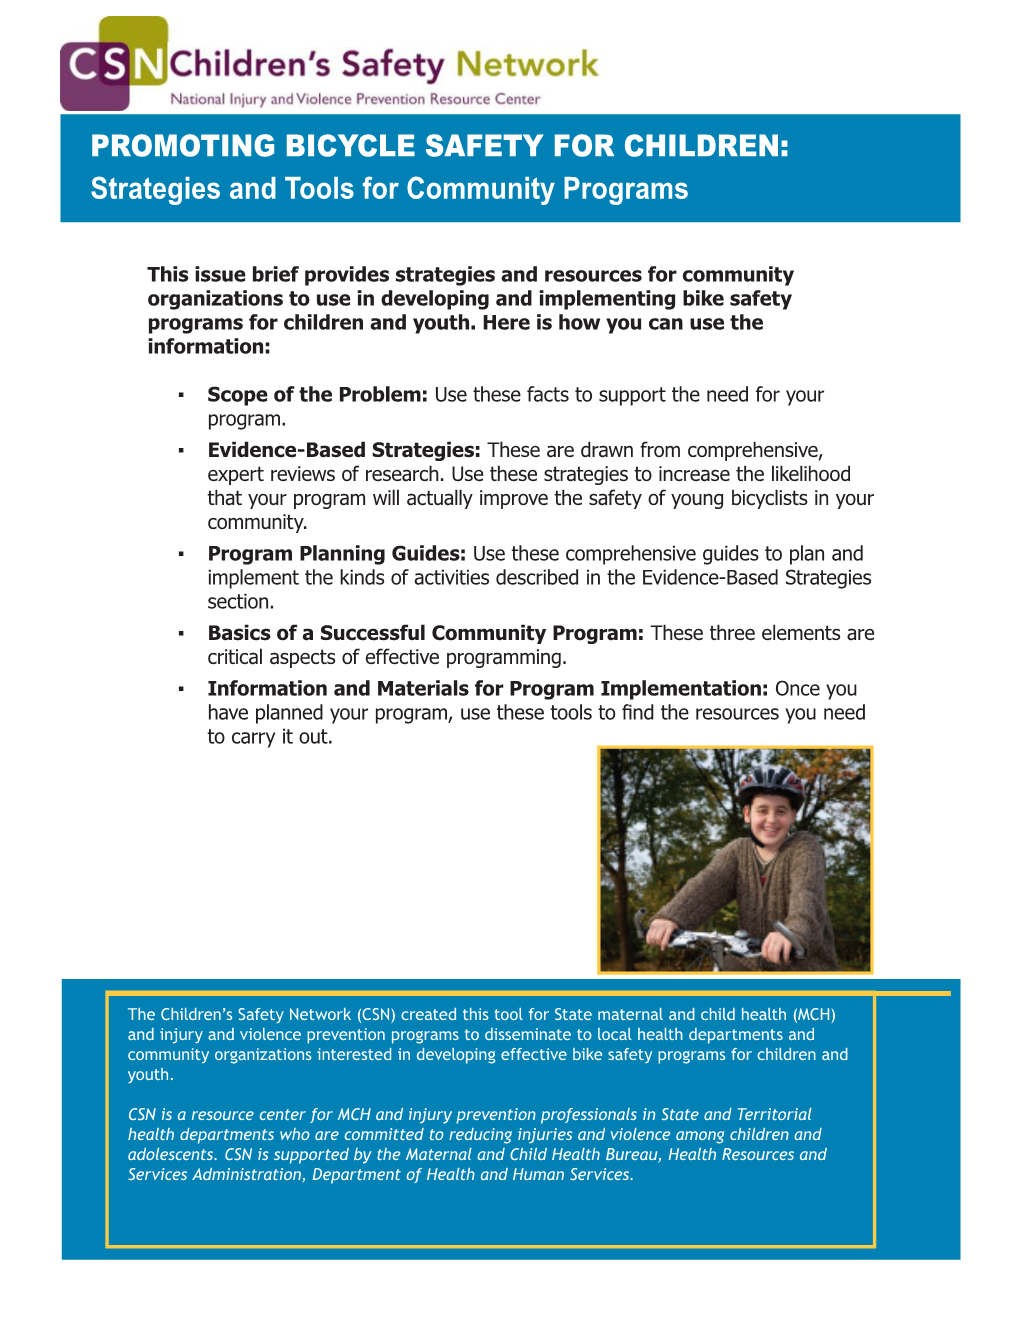 PROMOTING BICYCLE SAFETY for CHILDREN: Strategies and Tools for Community Programs